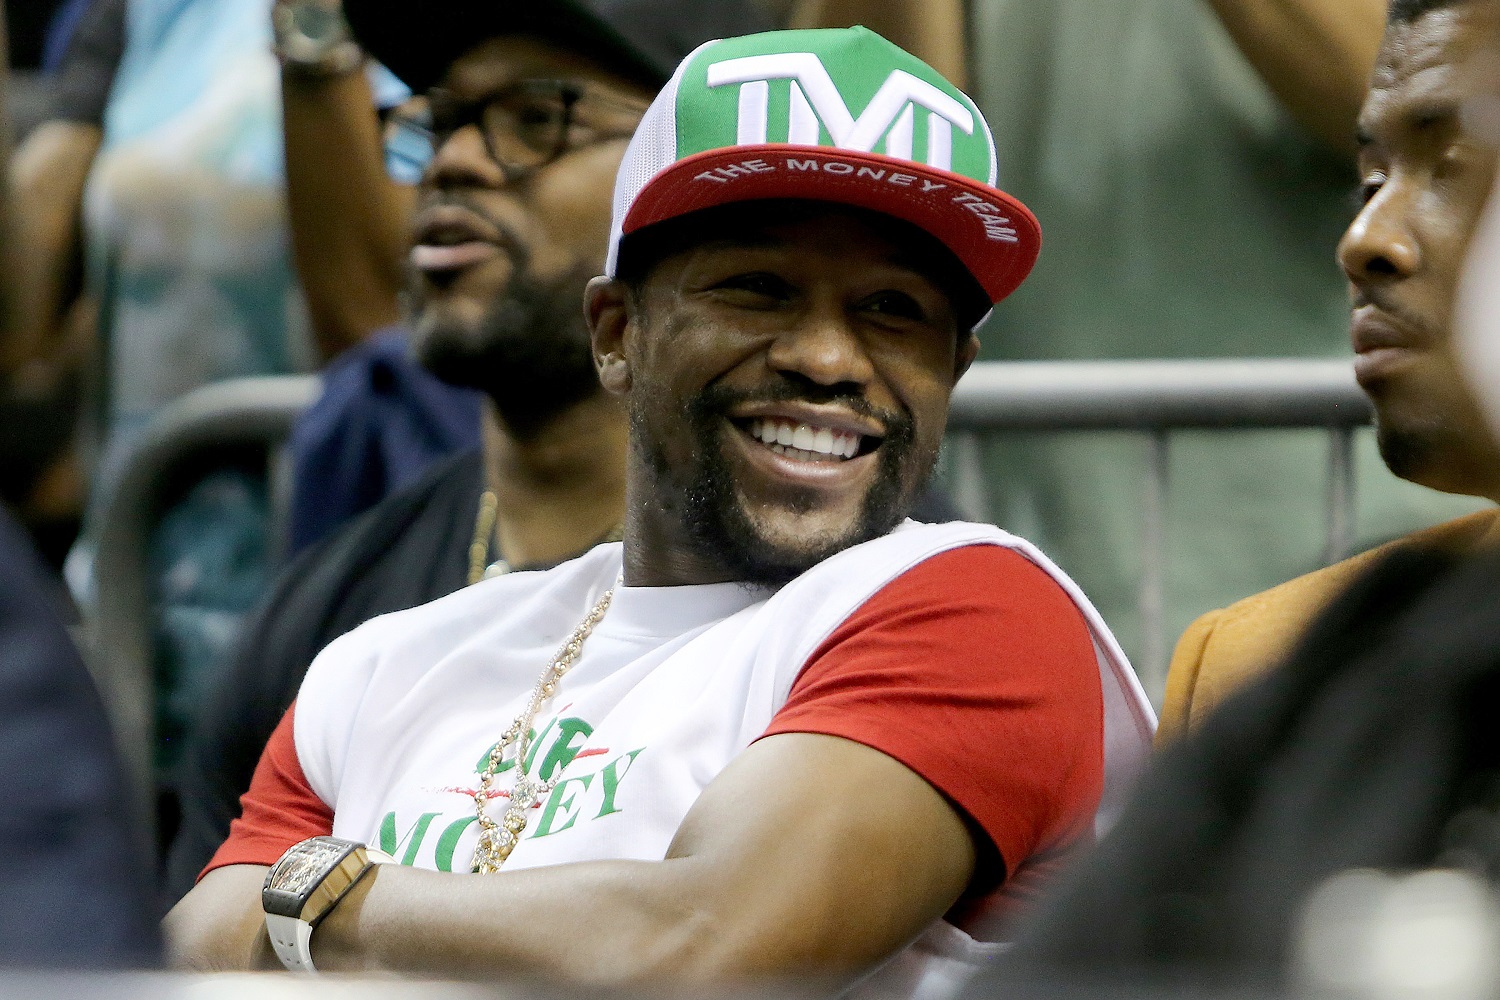 Multi-time world champion Floyd Mayweather has not fought in an official bout since defeating Conor McGregor in 2017. | Alex Menendez/Getty Images